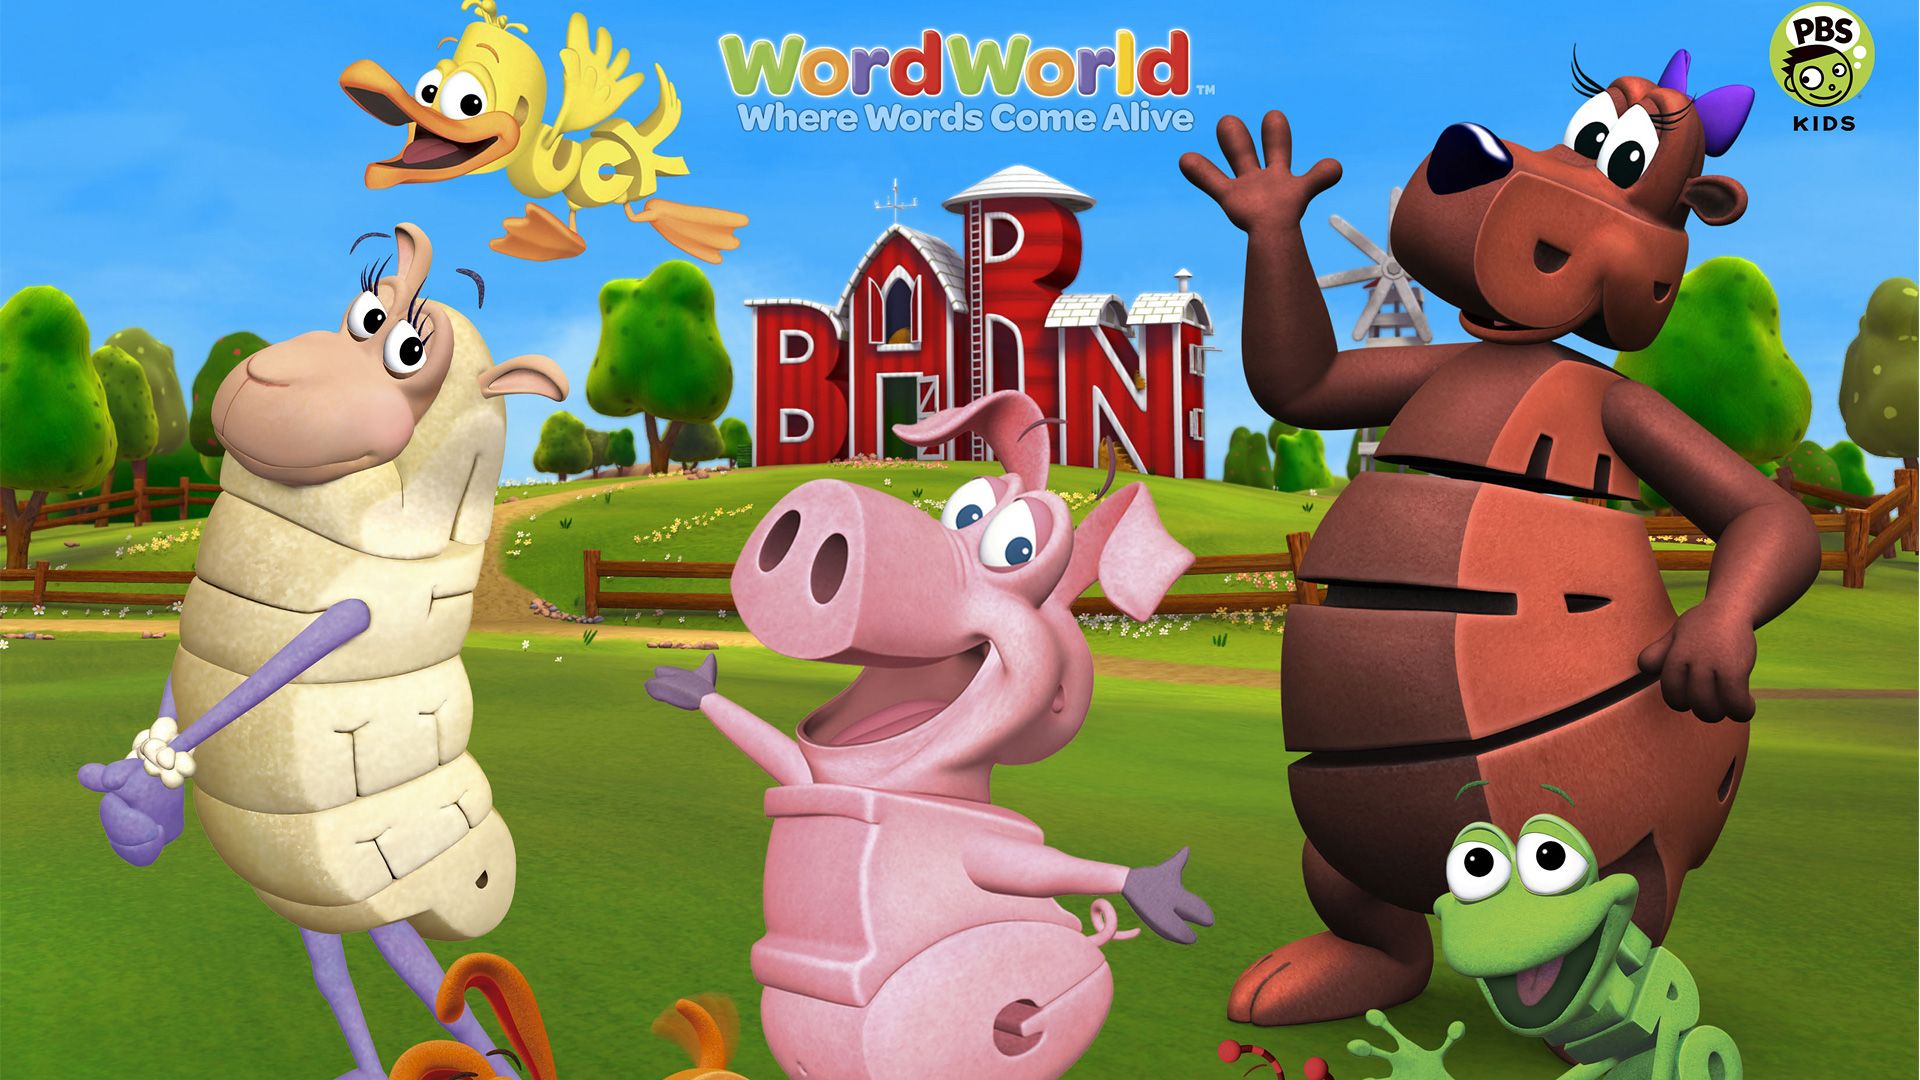 WordWorld Episodes on Prime Video, Hoopla, PBS Kids, and Streaming Online